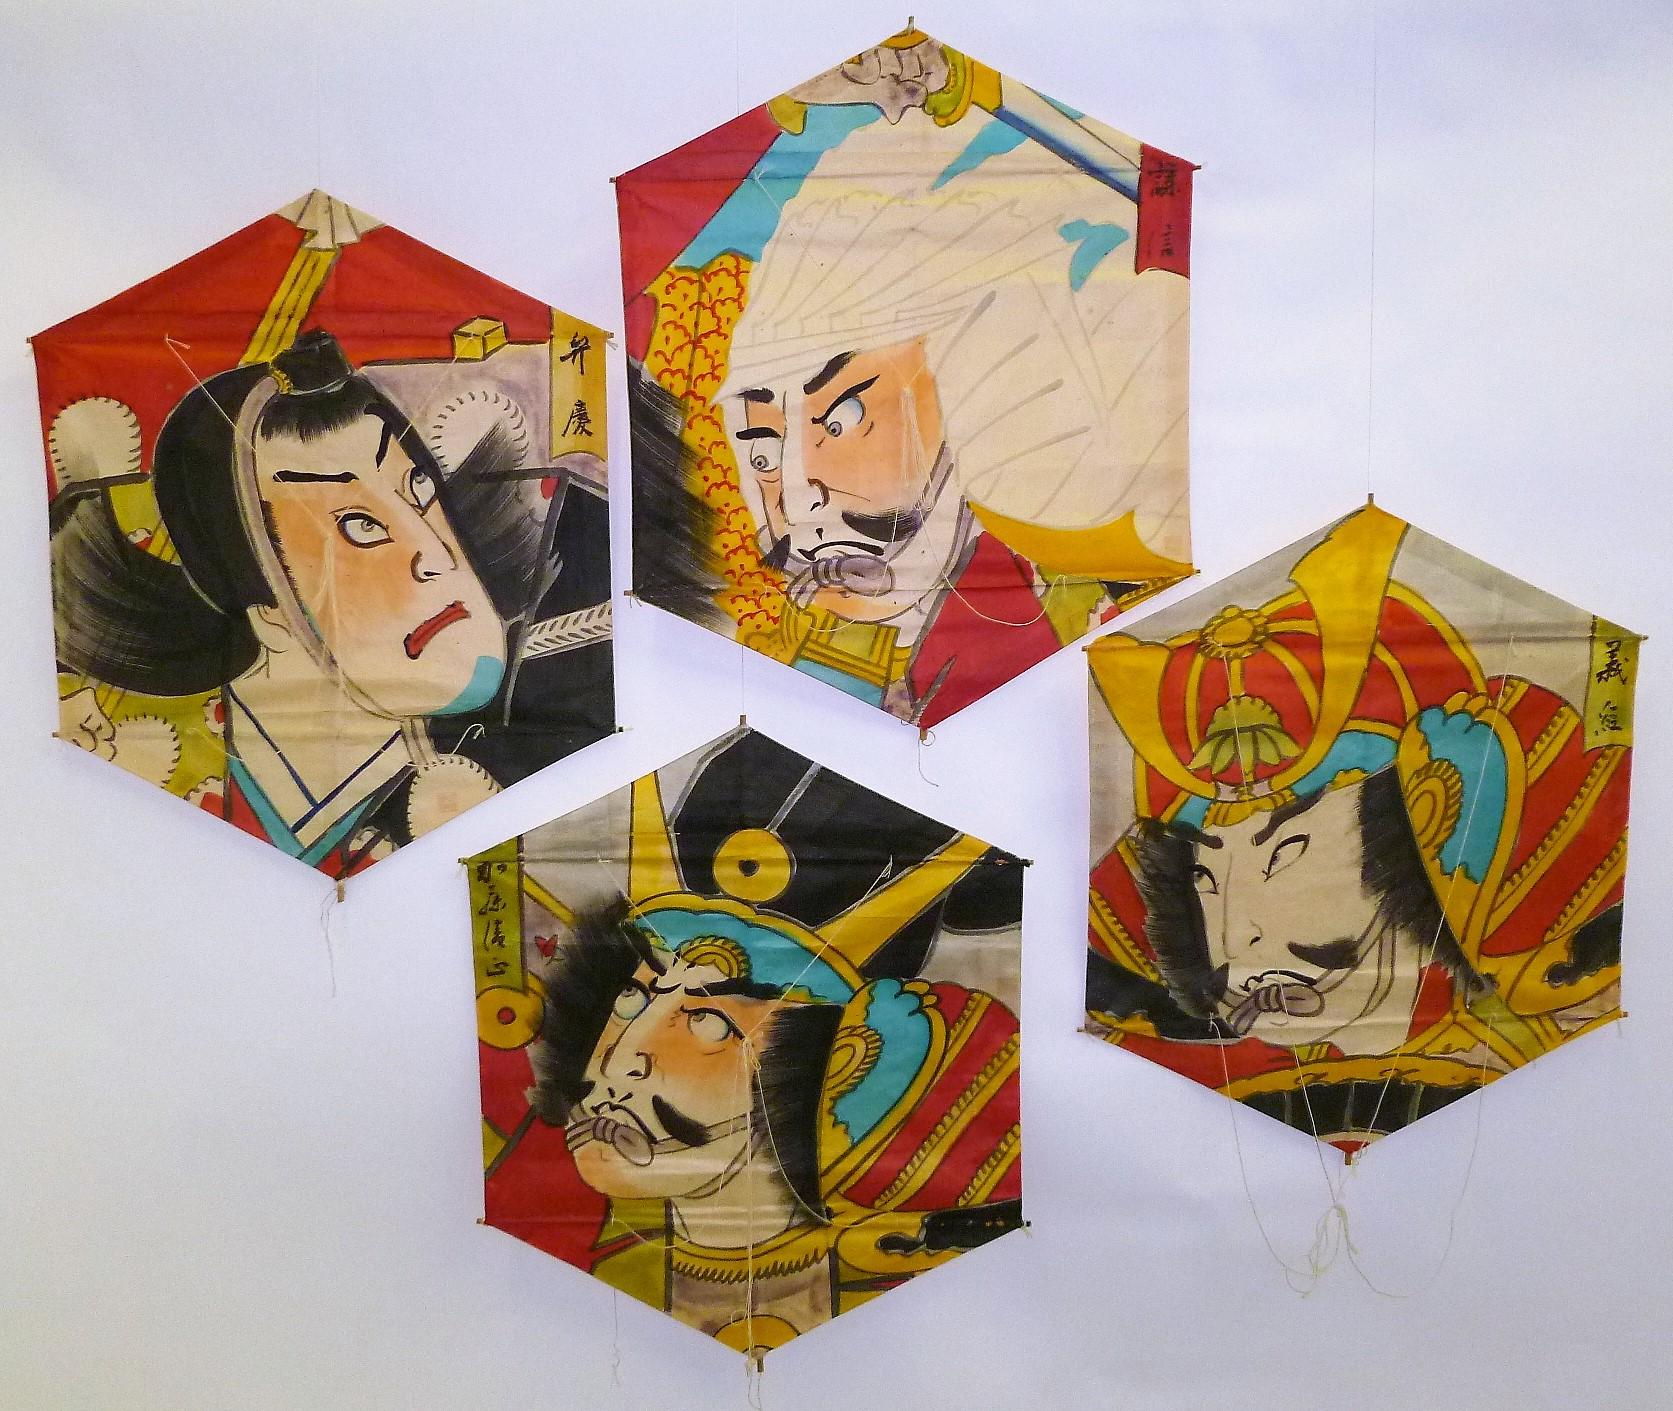 Beautifully hand painted on rice paper with bamboo framing / supports, these four vintage hexagonal kites from Japan depict famous Classic Warriors. Warlords and Samurai.  From the 1970s, and never flown, they make a wonderful hanging display.  We